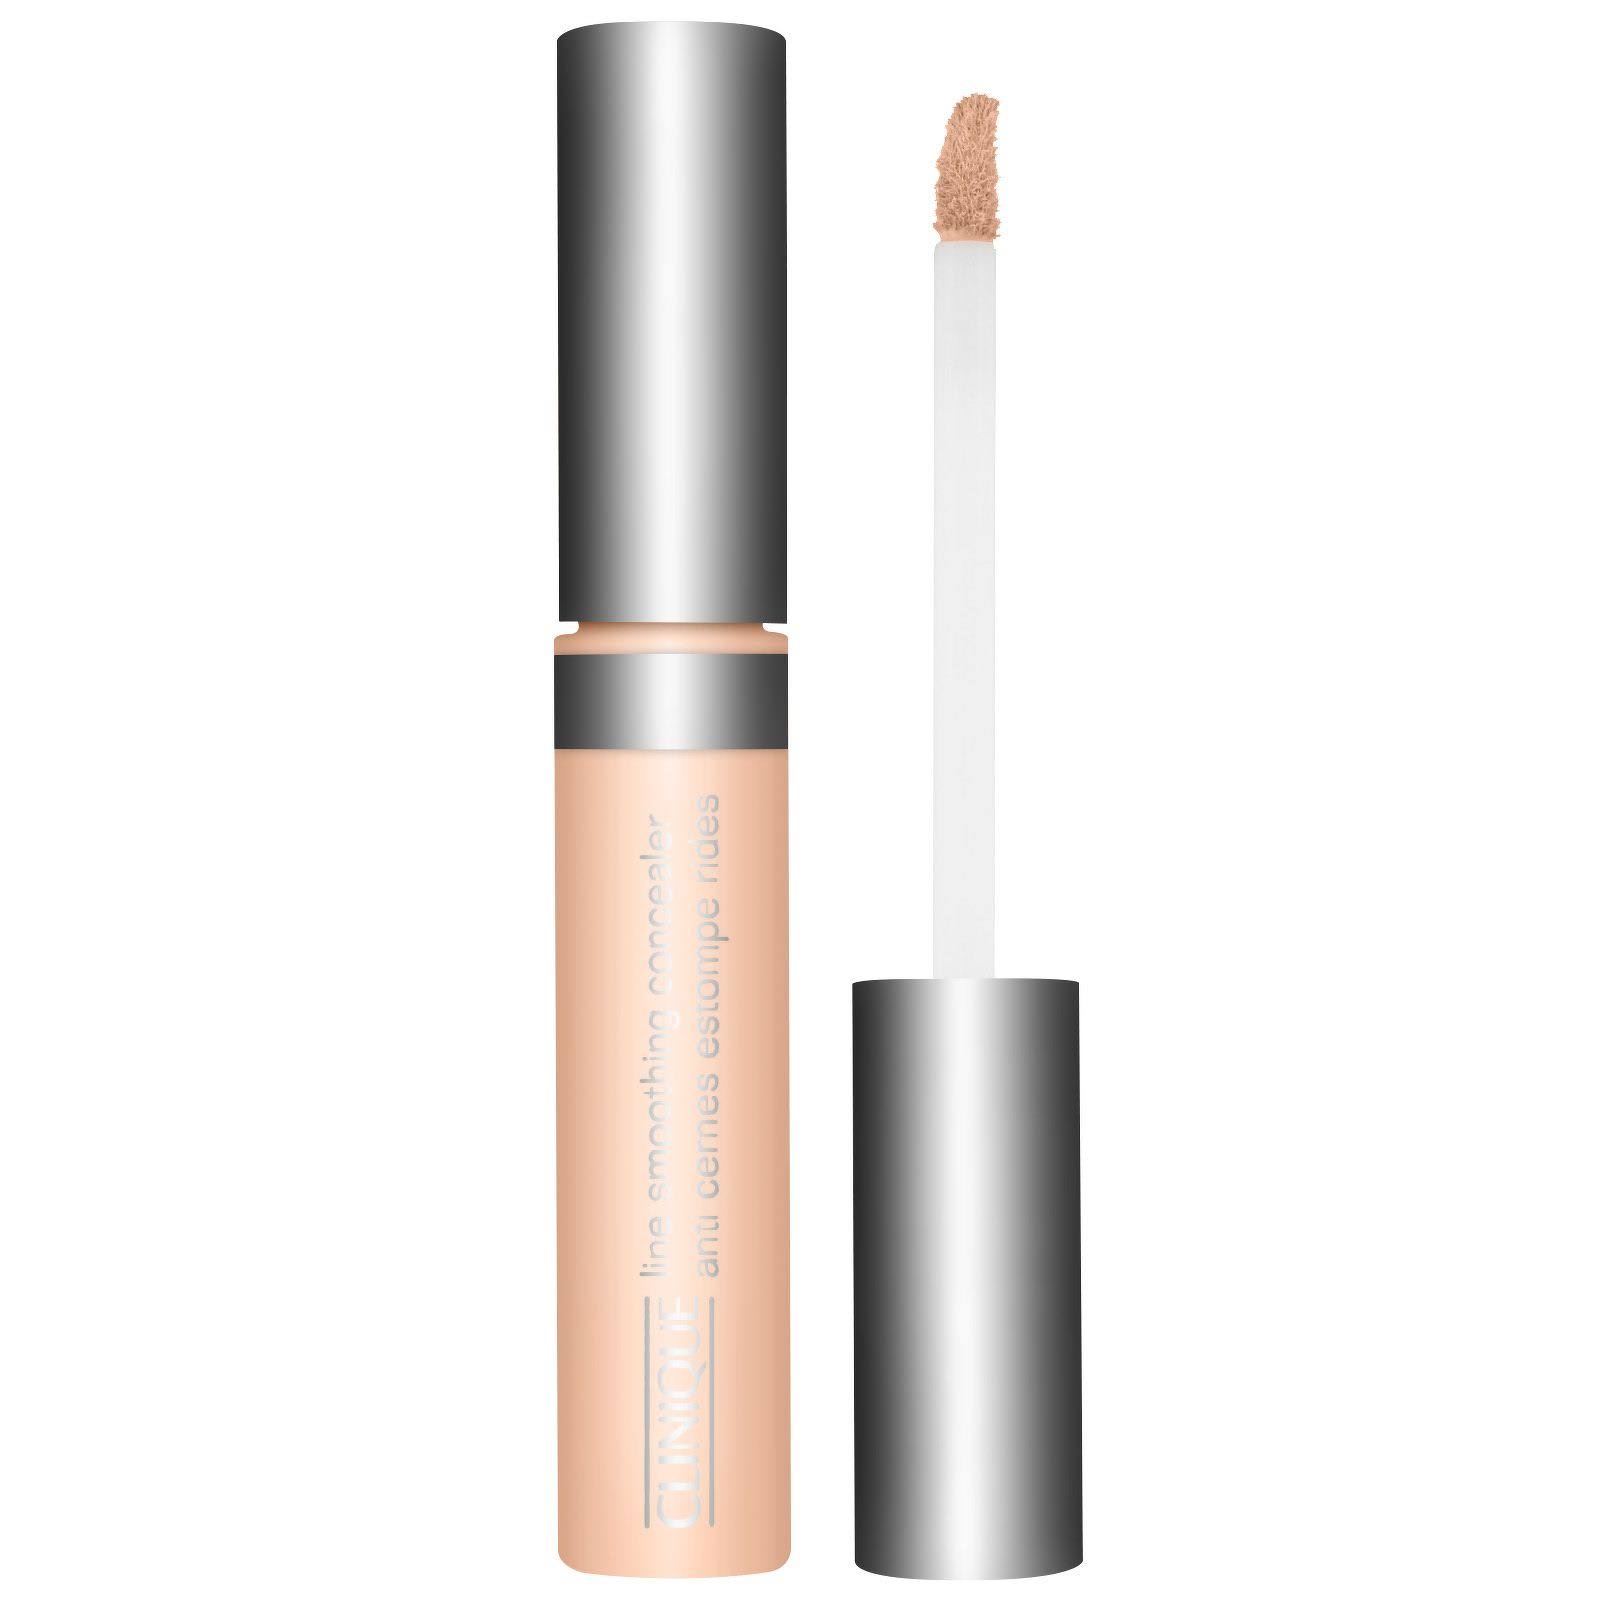 Clinique Line Smoothing Concealer - Light